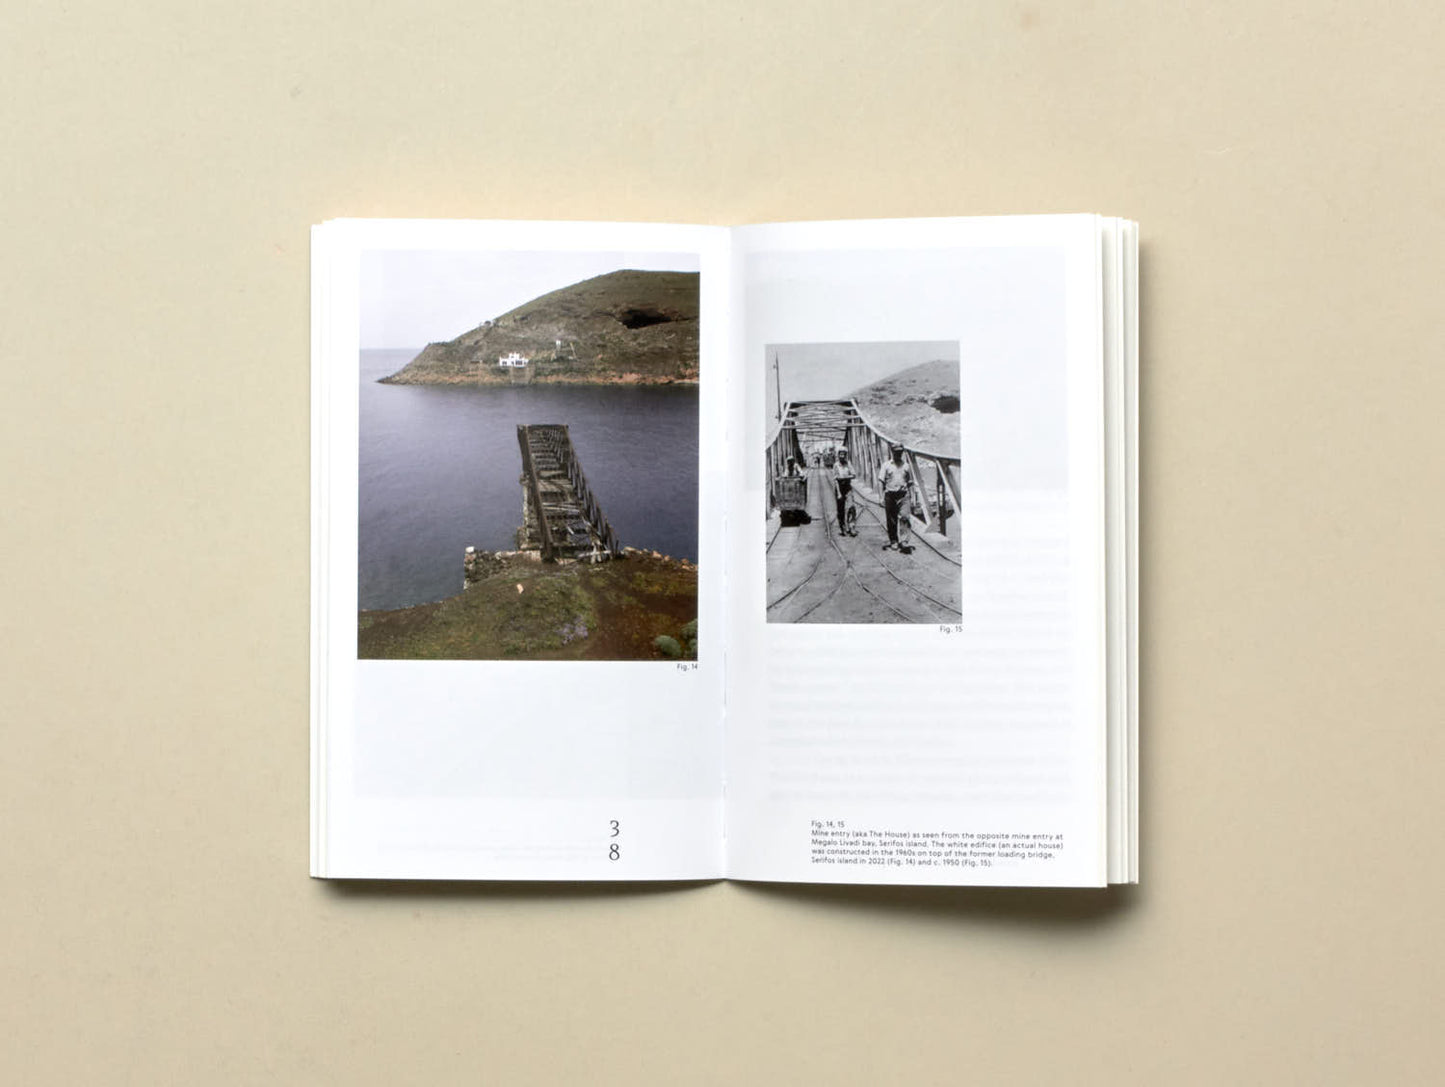 David Bergé (ed.), Bodies of Extraction: Underneath the Ground of Islands